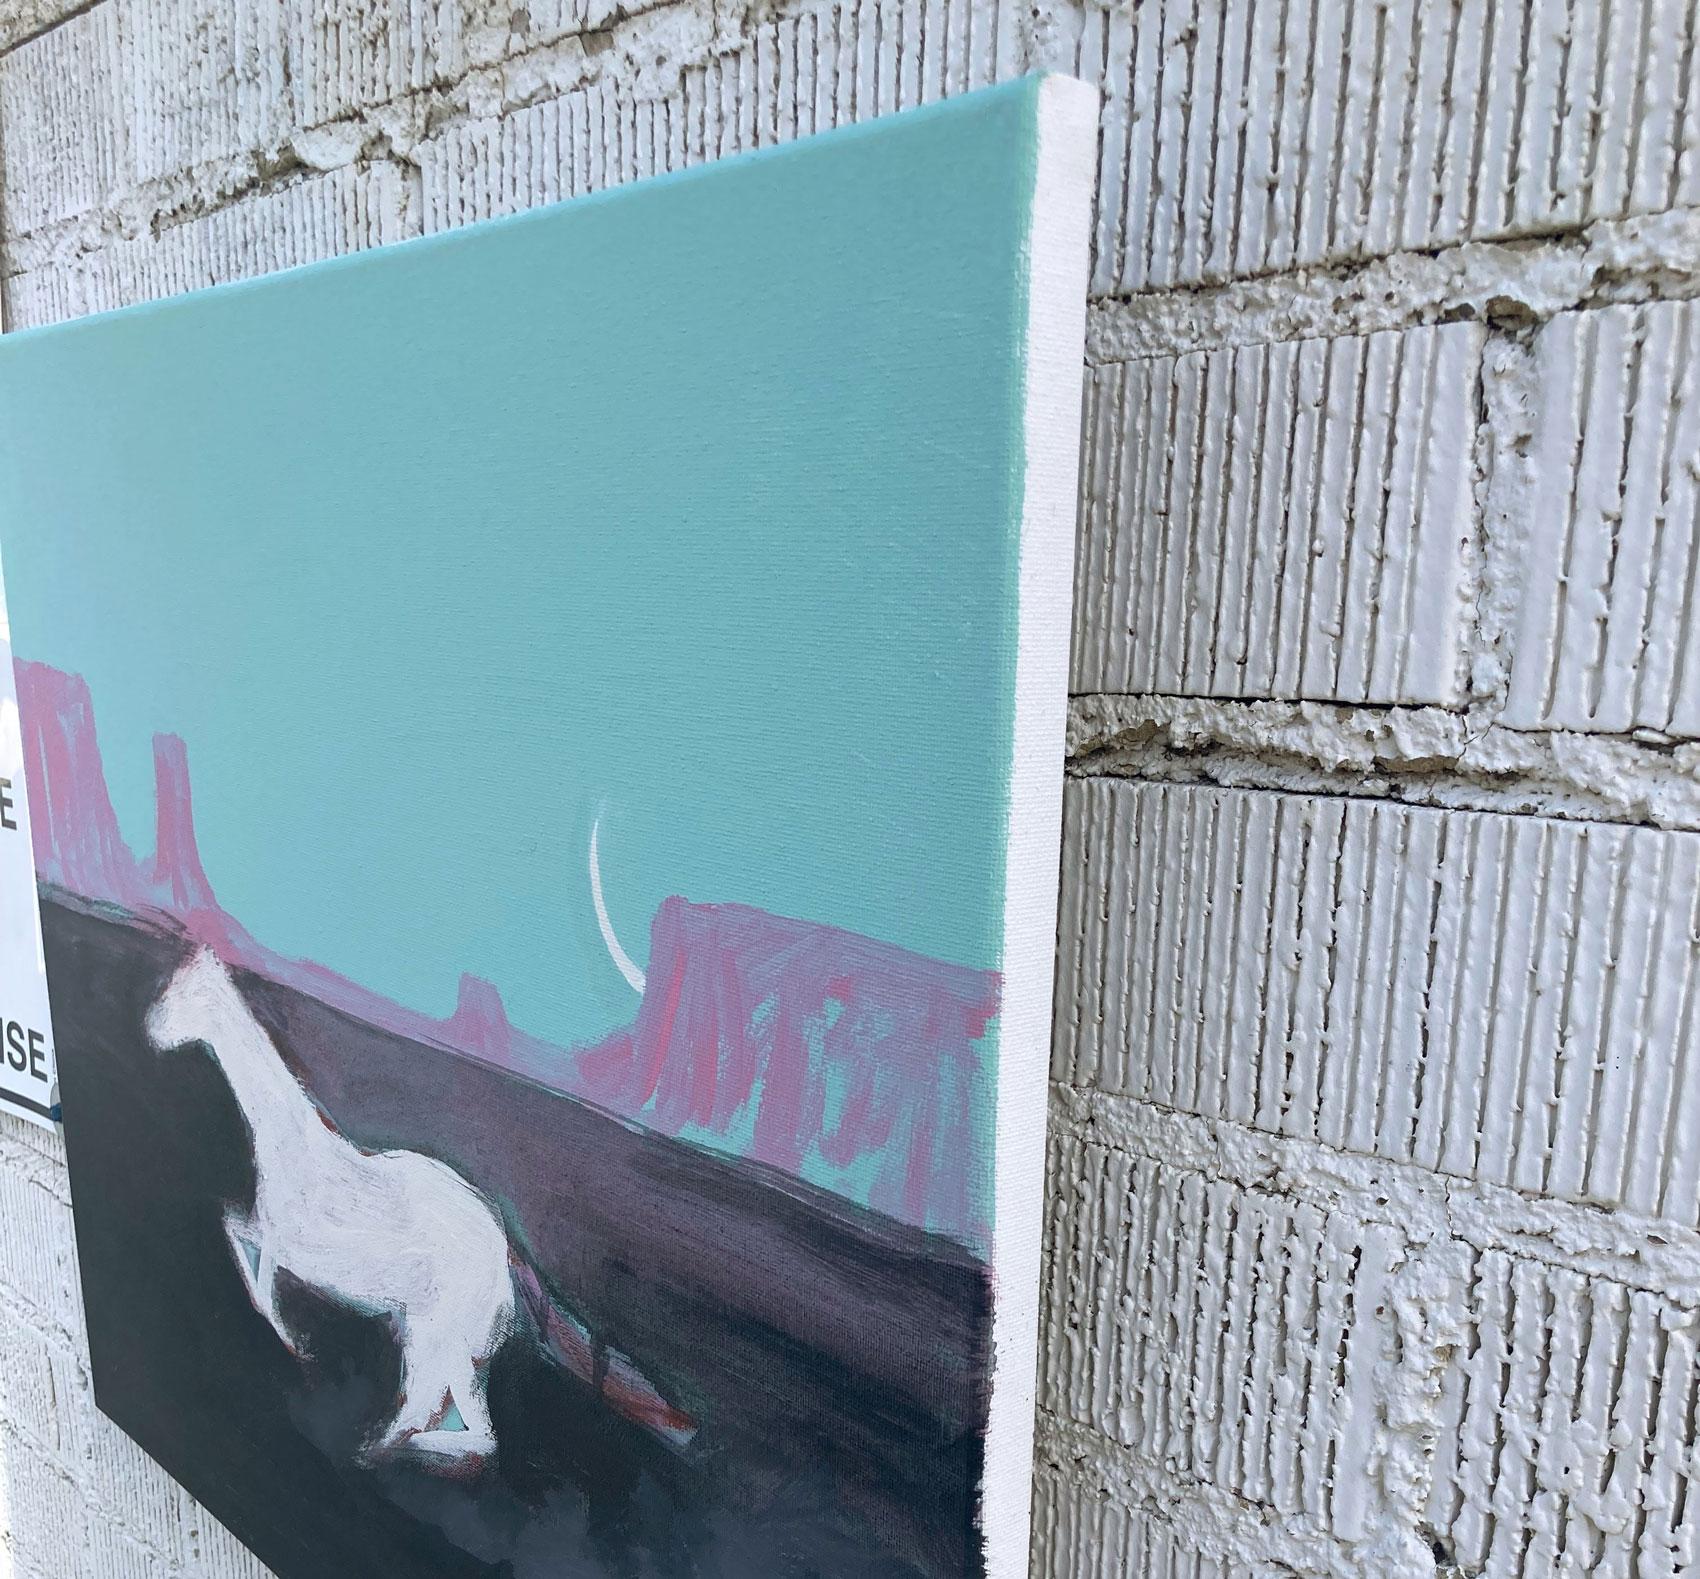 <p>Artist Comments<br>Artist Nick Bontorno presents an image of a white horse speeding through a vast canyon. The crescent moon peeks from the cliffs, casting a subtle glow. In his signature style, Nick renders the subject with minimal